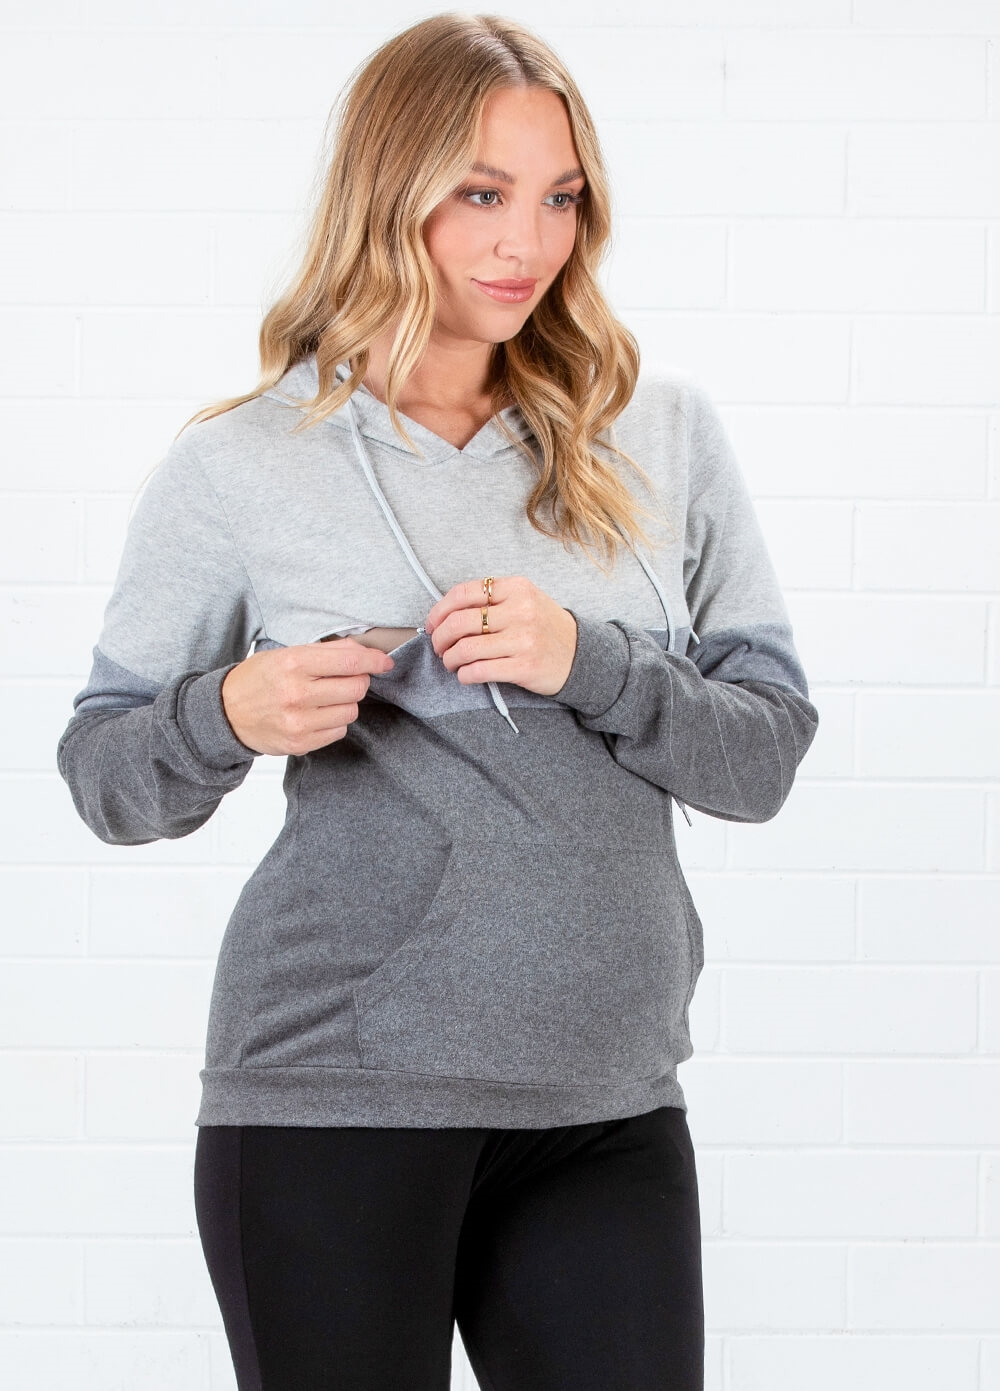 Lait & Co - Morgane Maternity Nursing Hooded Jumper | Queen Bee